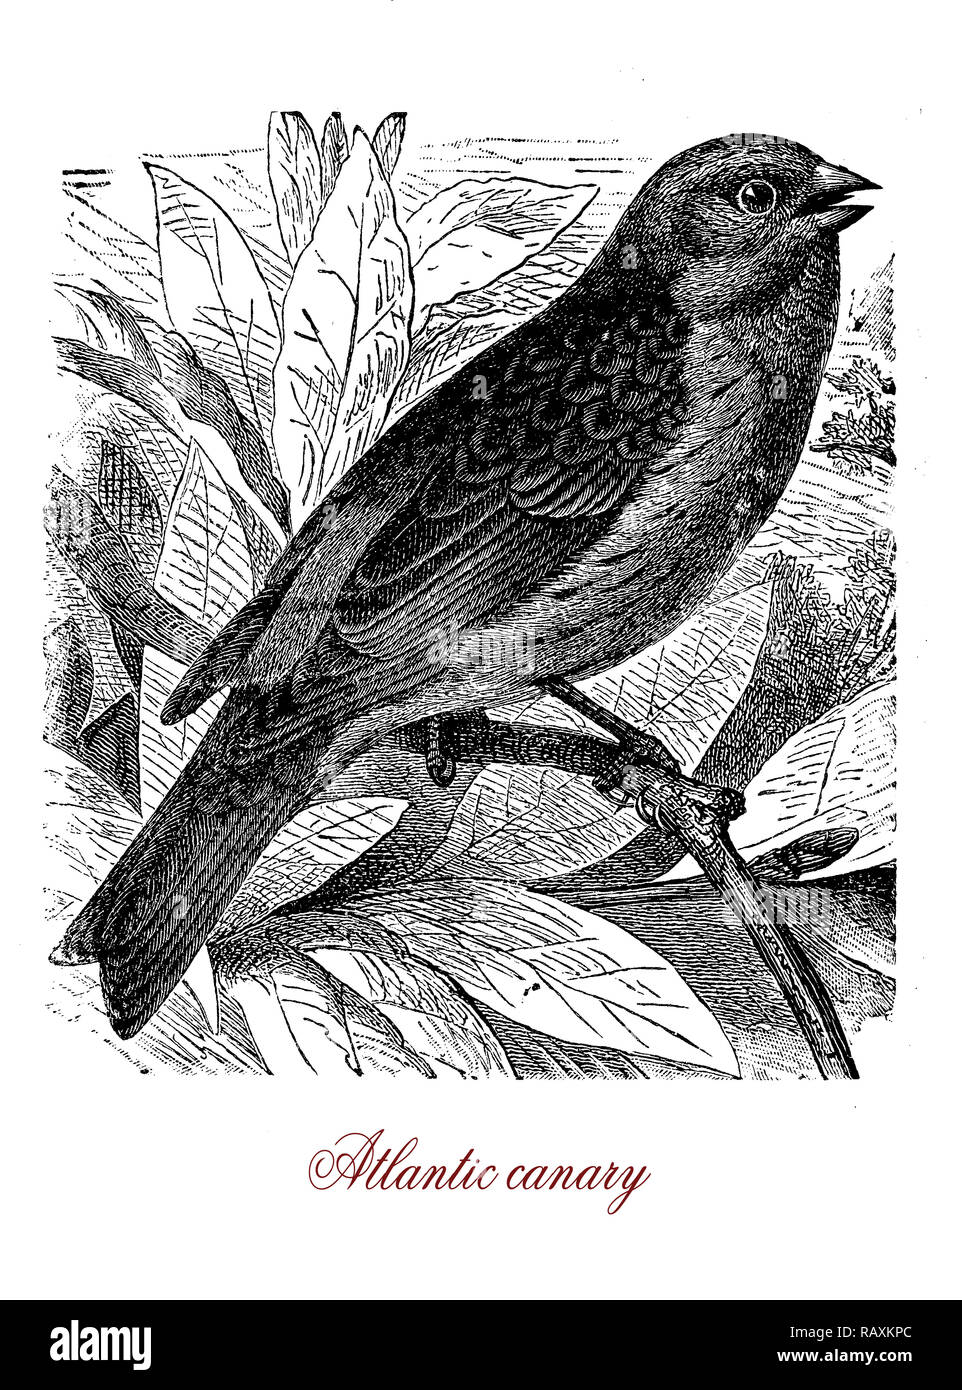 Vintage engraving of Altlantic canary or wild canary,small passerine songbird native to Canary islands, the Azores and Madeira, with yellow-green plumage and brown streaks . A domestic form, the domestic canary, is kept at home as pet. Stock Photo